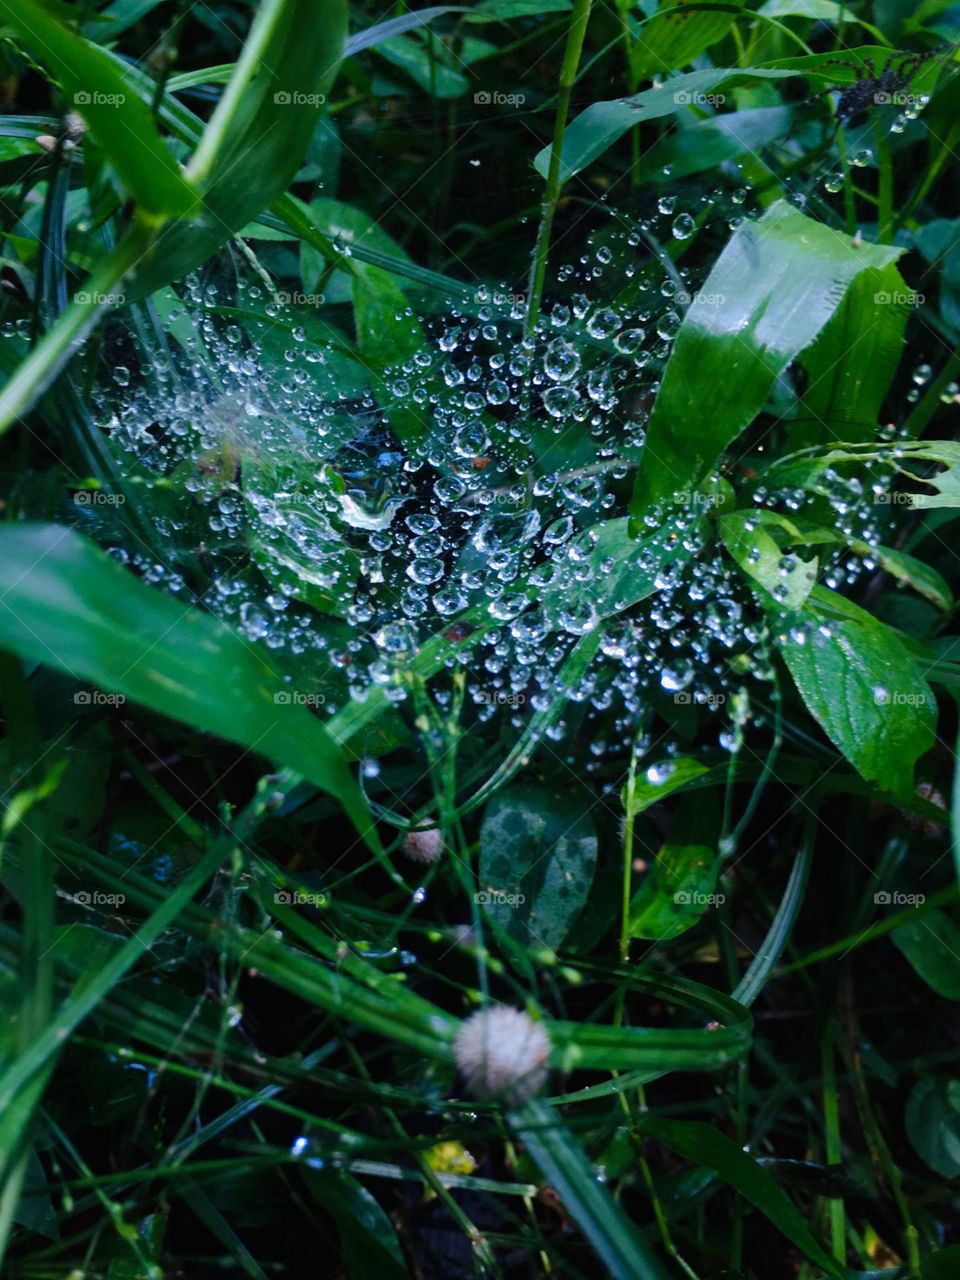 Water droplets stuck on to a spiders web among the grass after a rainy day 